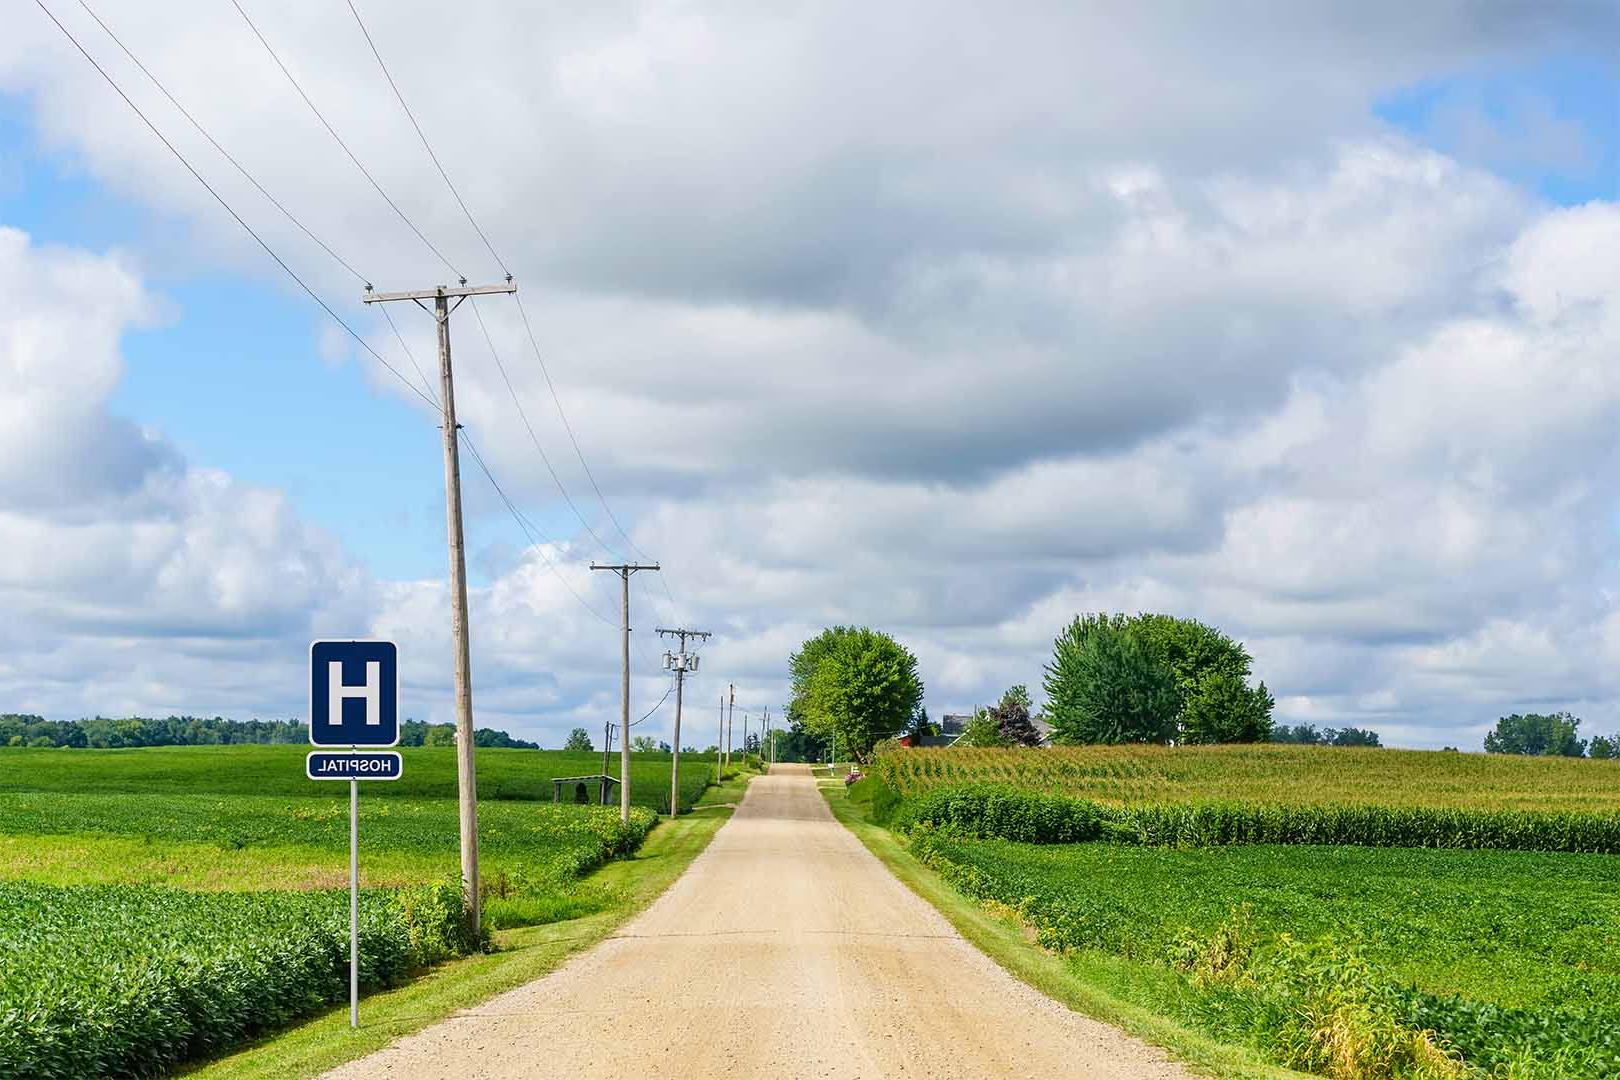 Image of a country road with road sign saying "Hospital"